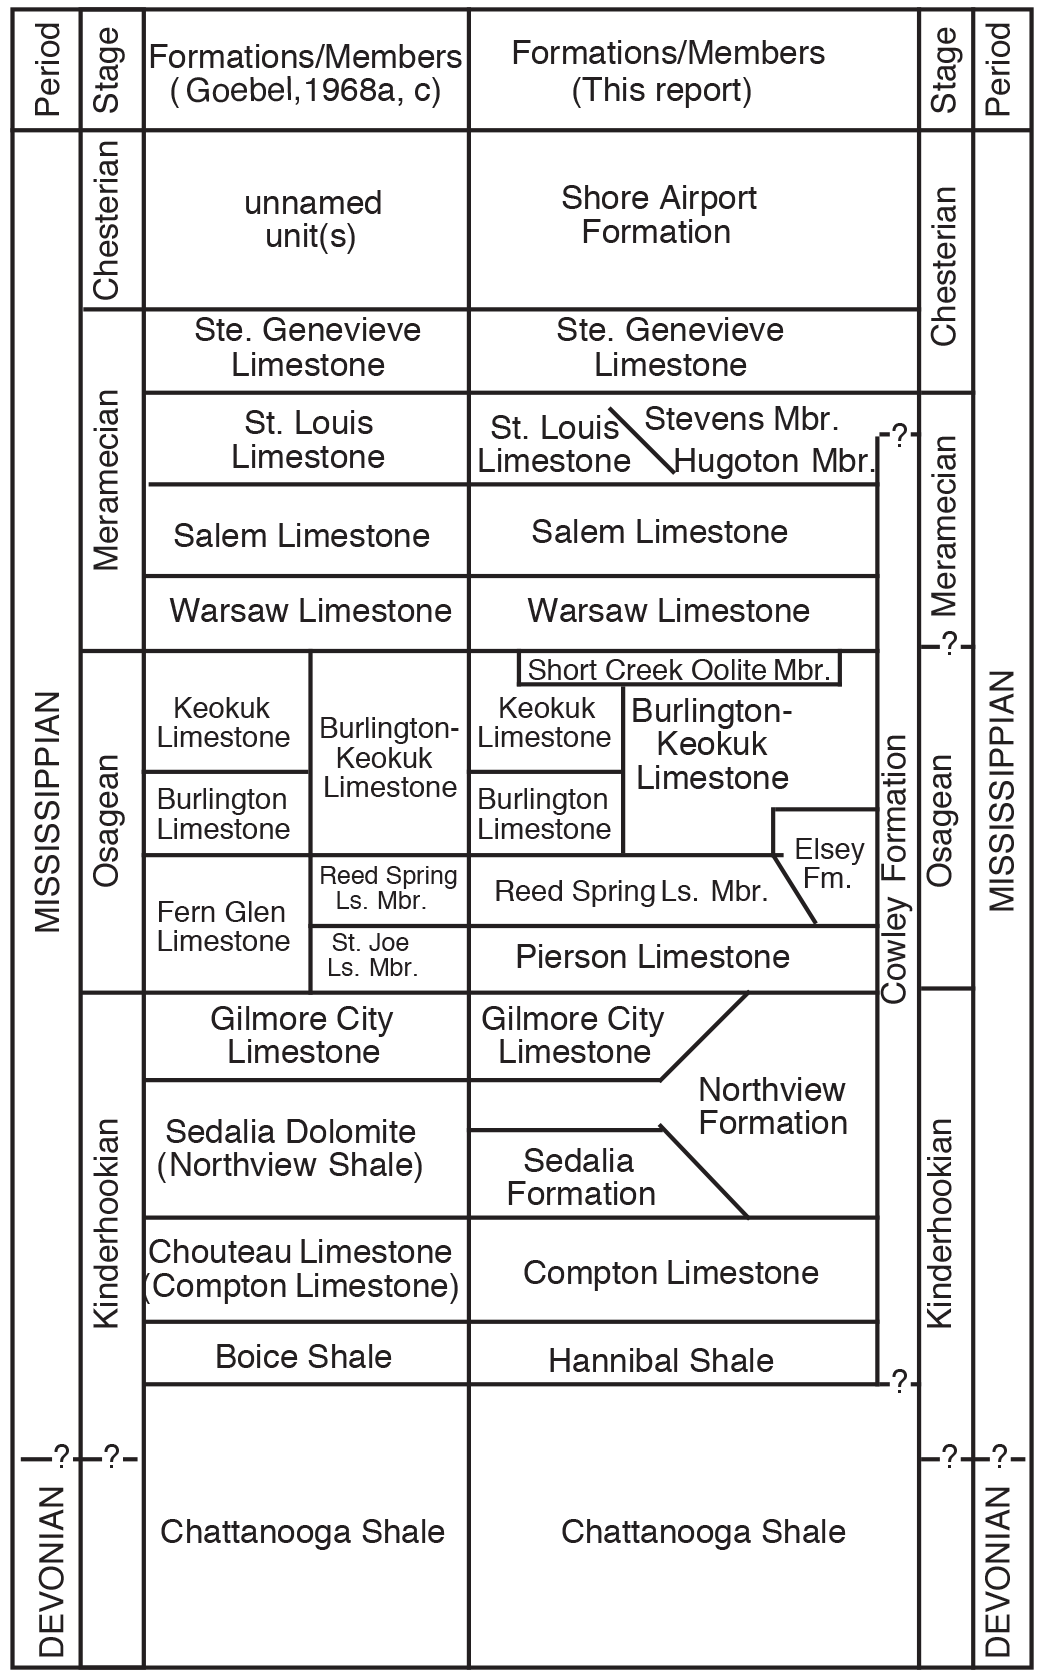 Mississippian stratigraphic nomenclature proposed by Maples (1994).